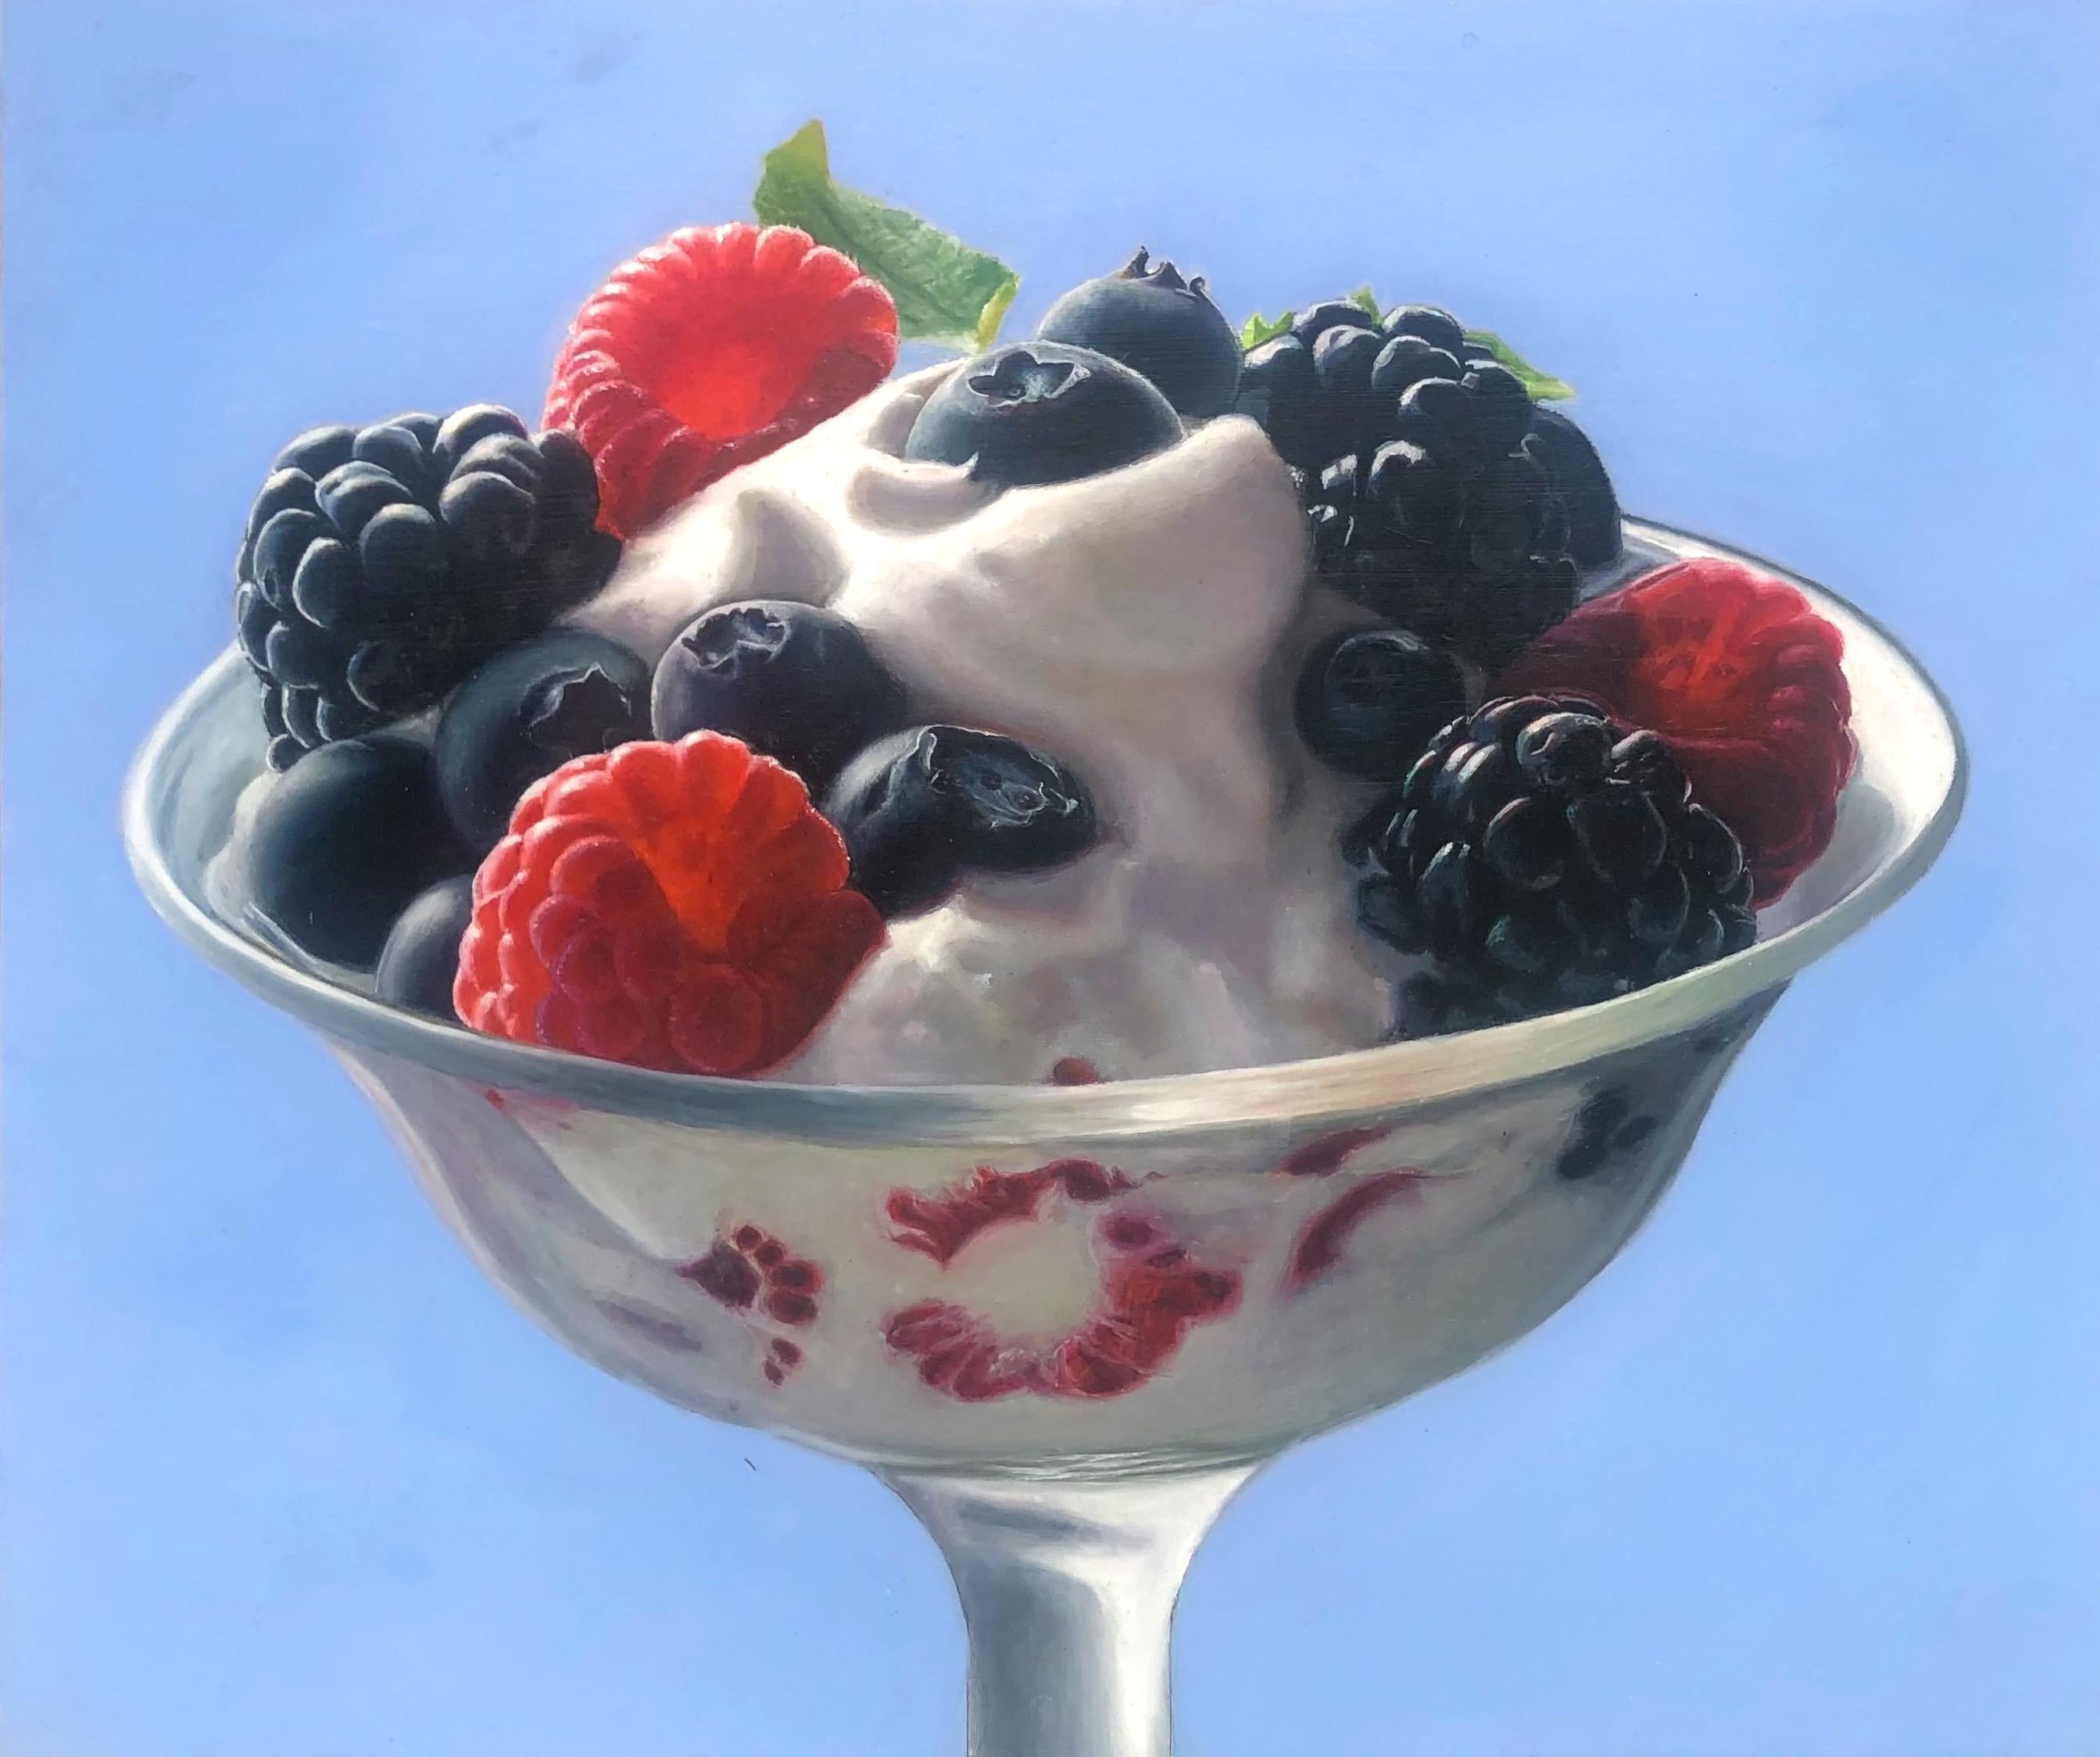 "Berries and Cream"  Photo-Realist Still Life 3 Fruits in Glass Compote on Blue